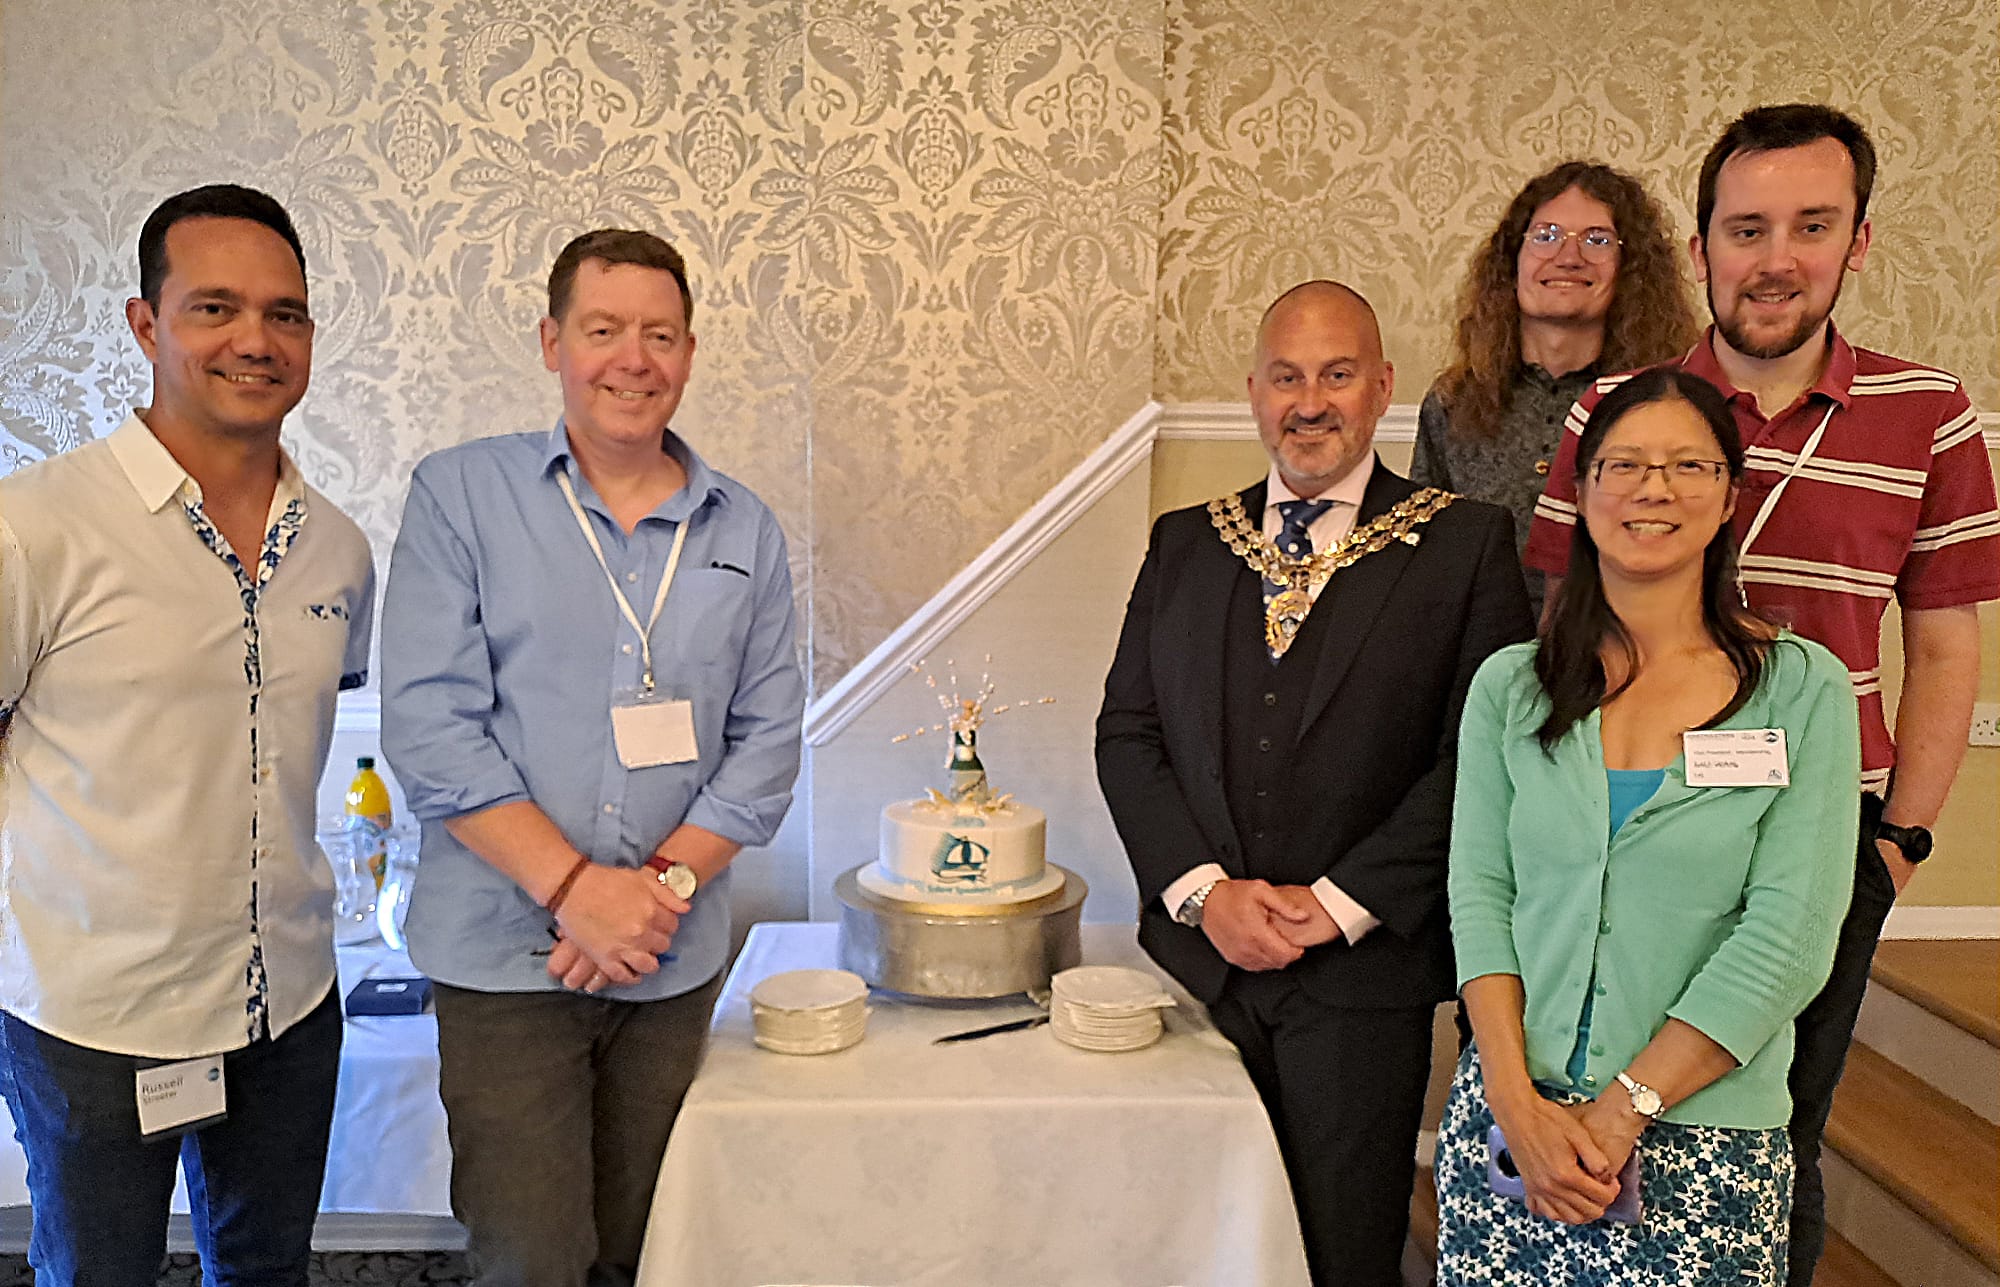 Lord Mayor attends Solent Speakers club as it celebrates 20th anniversary.